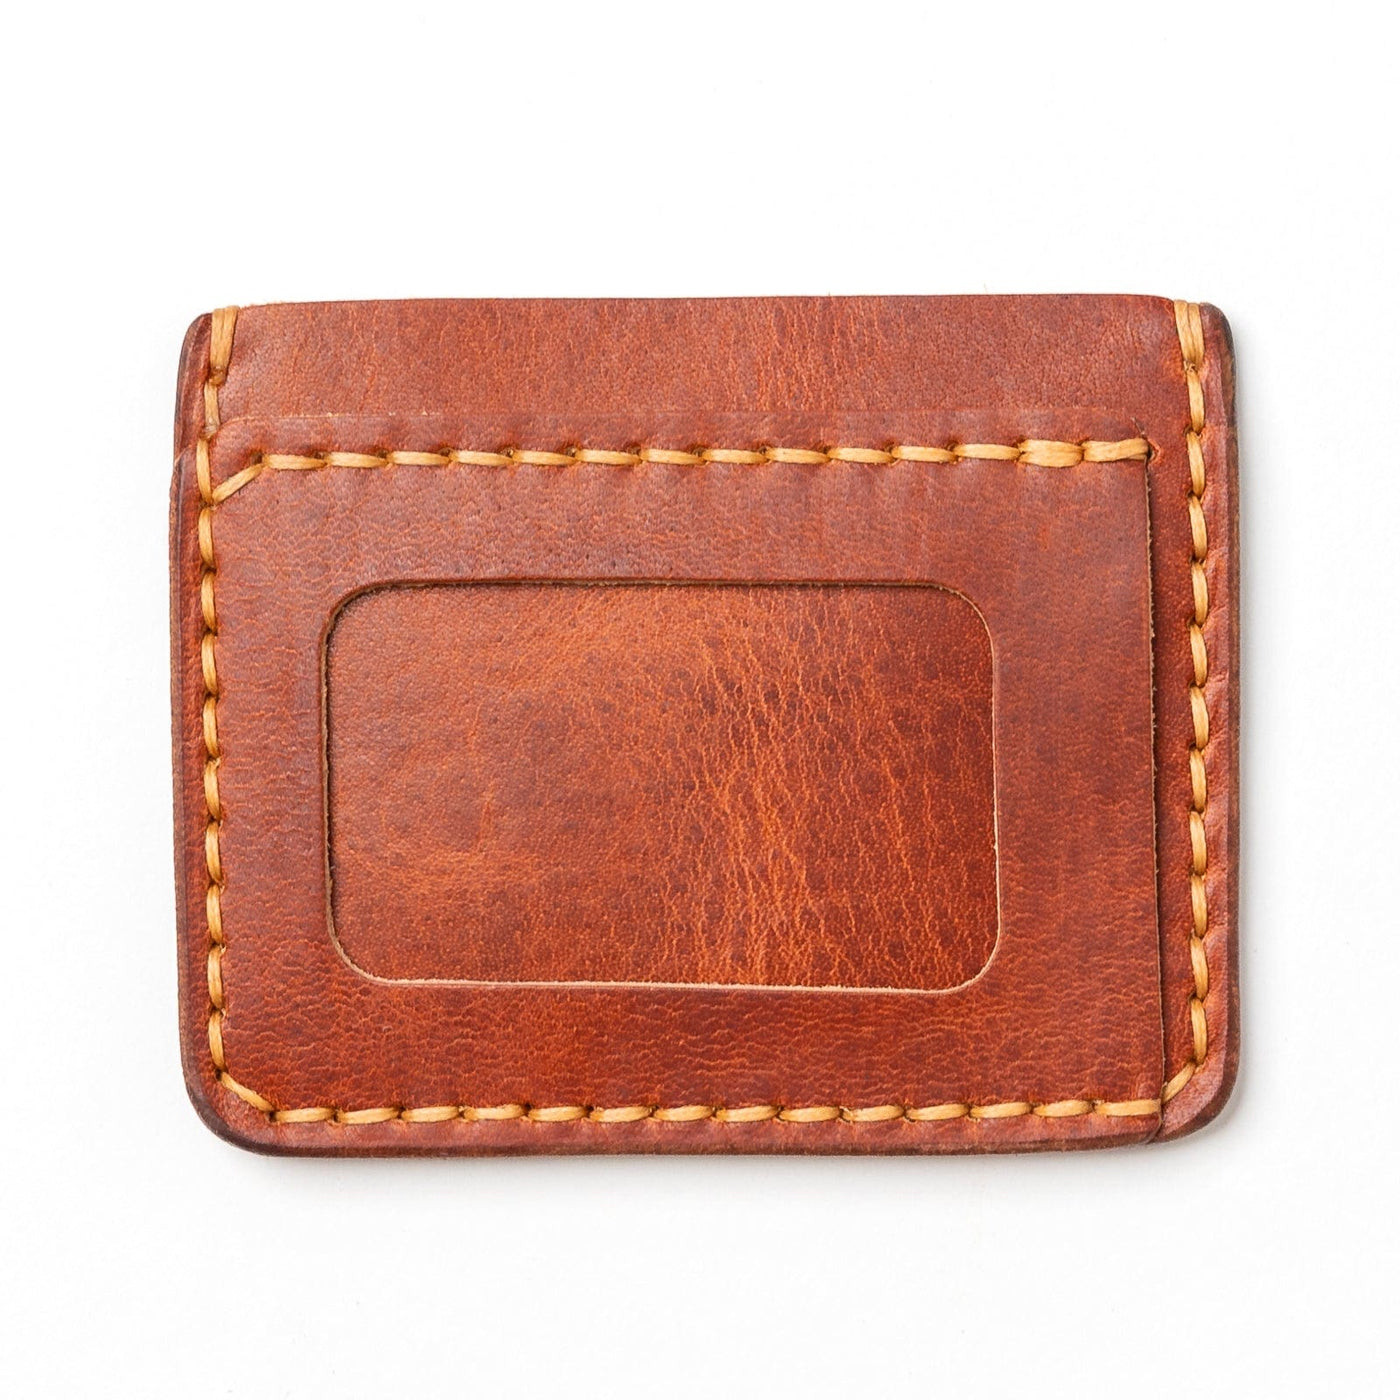 English Tan ID Wallet: Durable with Convenient Billfold Slot - Popov ...